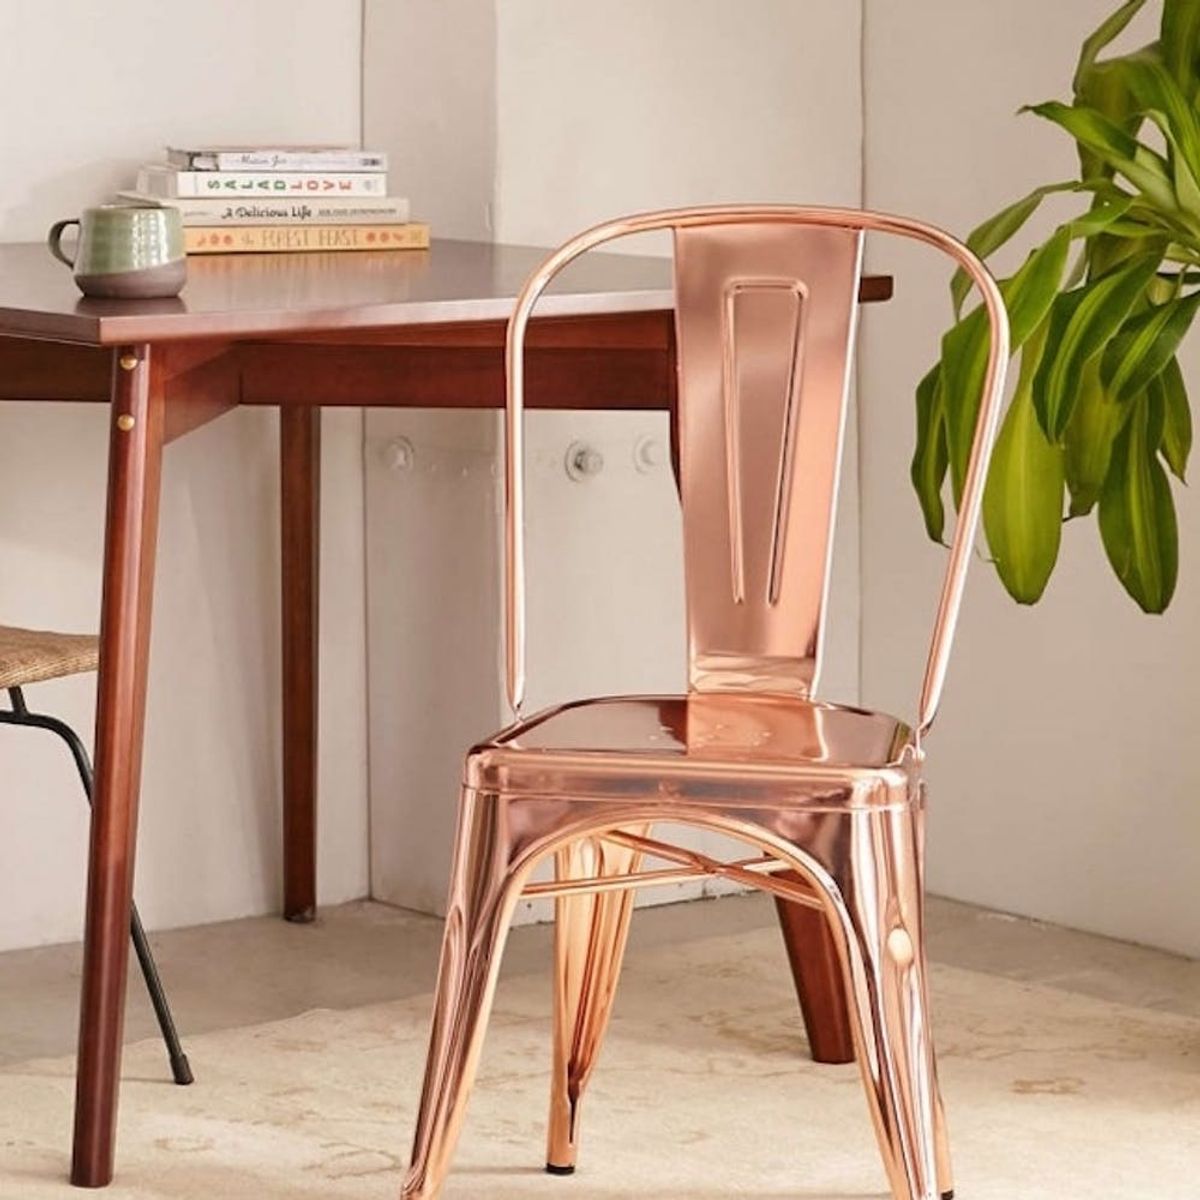 25 New Copper Accessories Your Home Needs